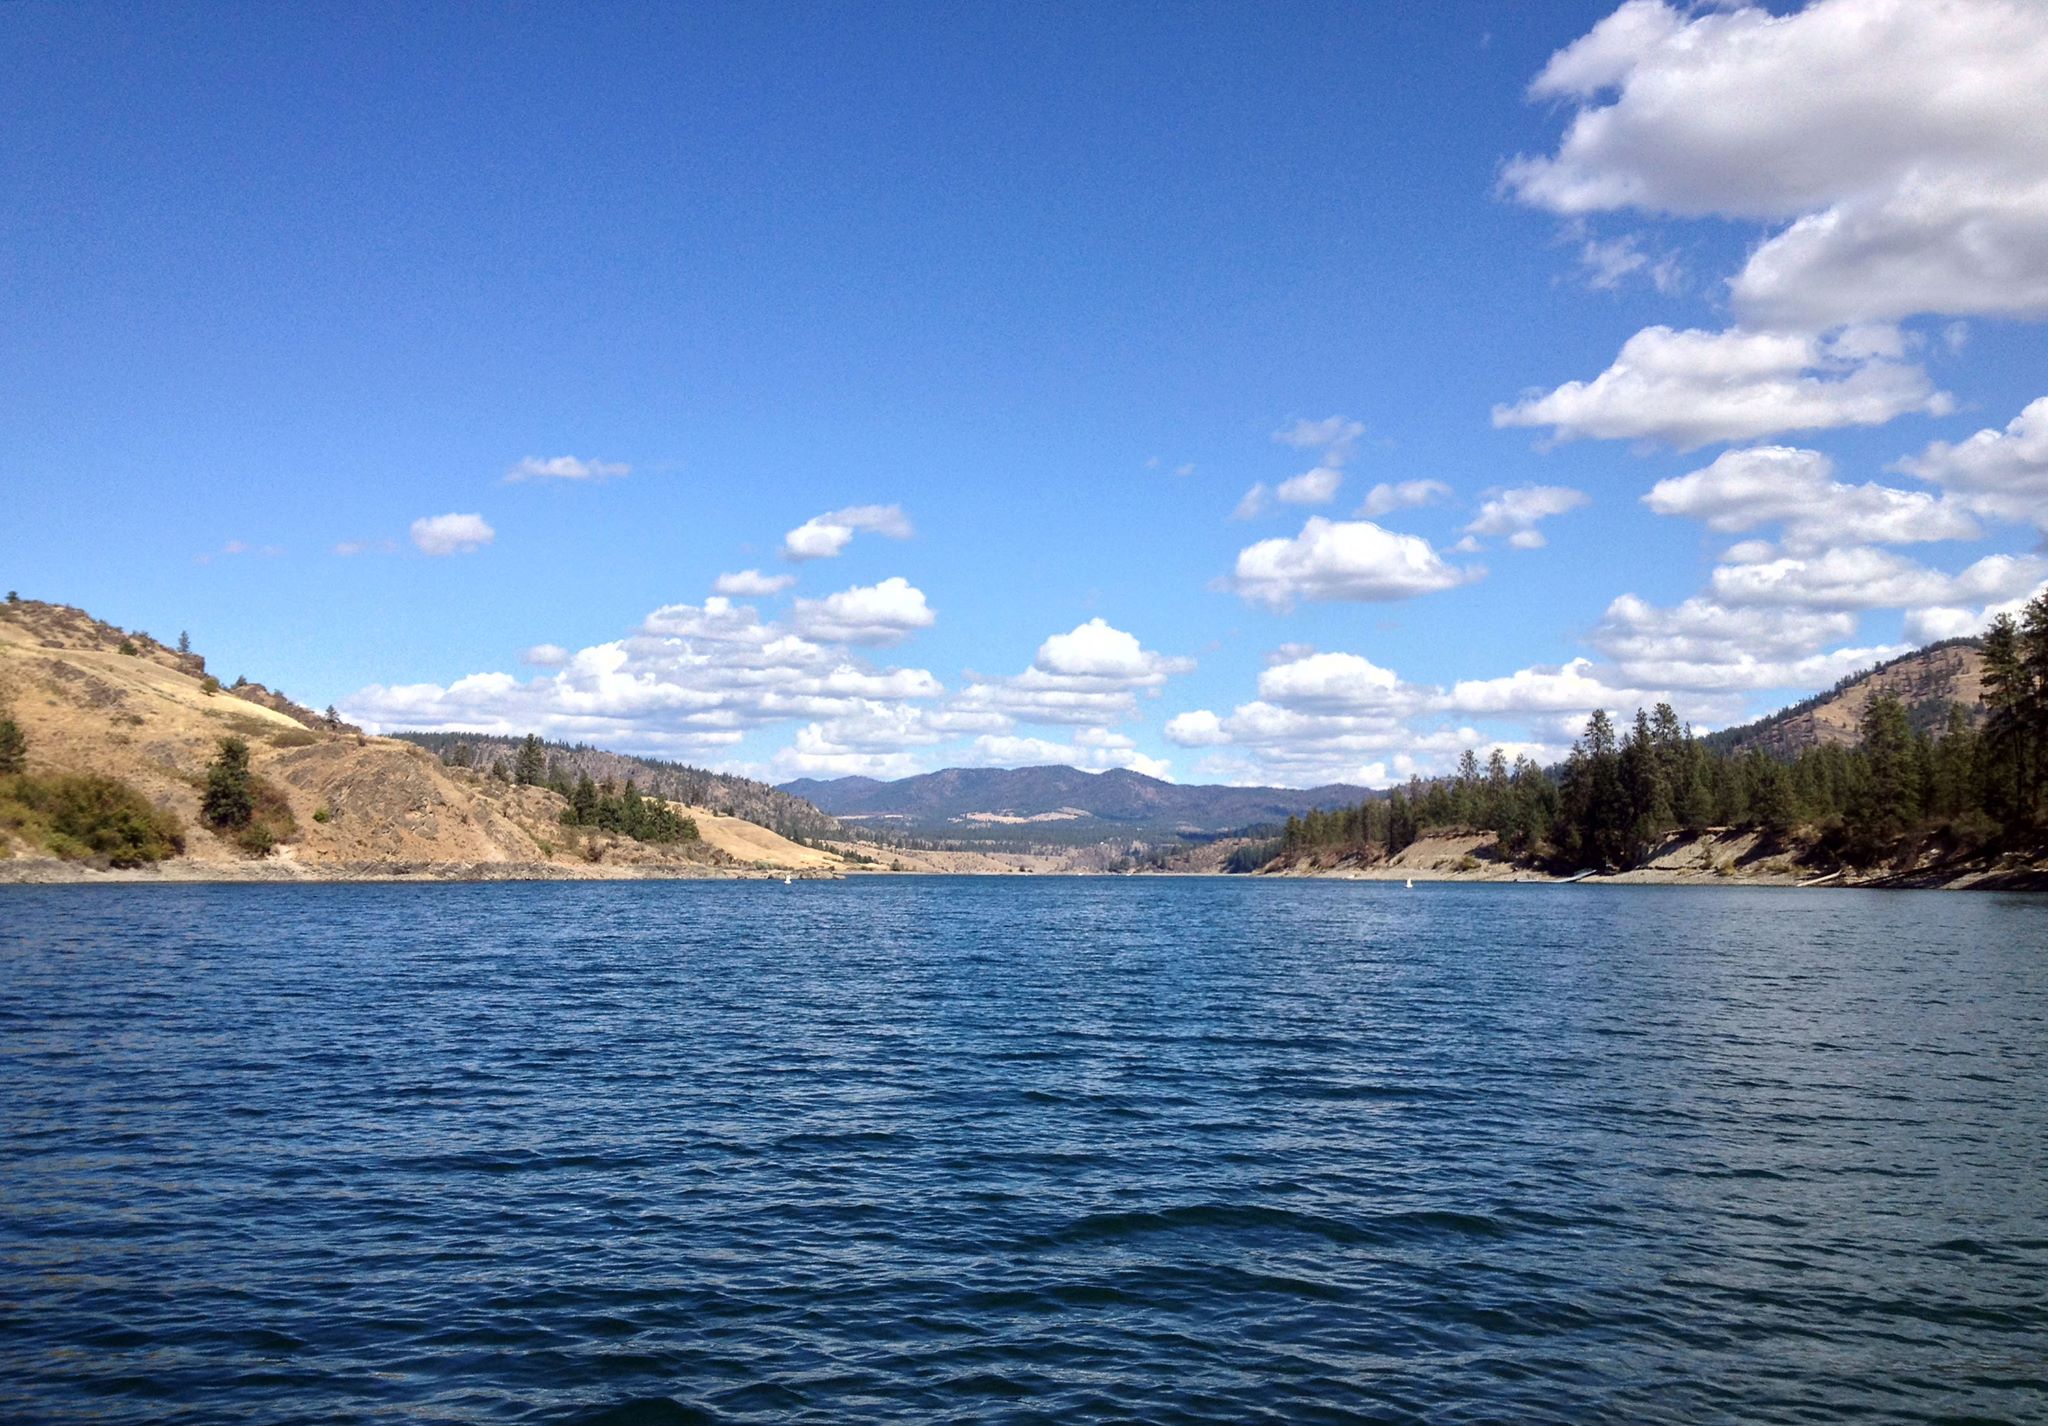 Looking down Lake Roosevelt with clear skies and treed shorelines.